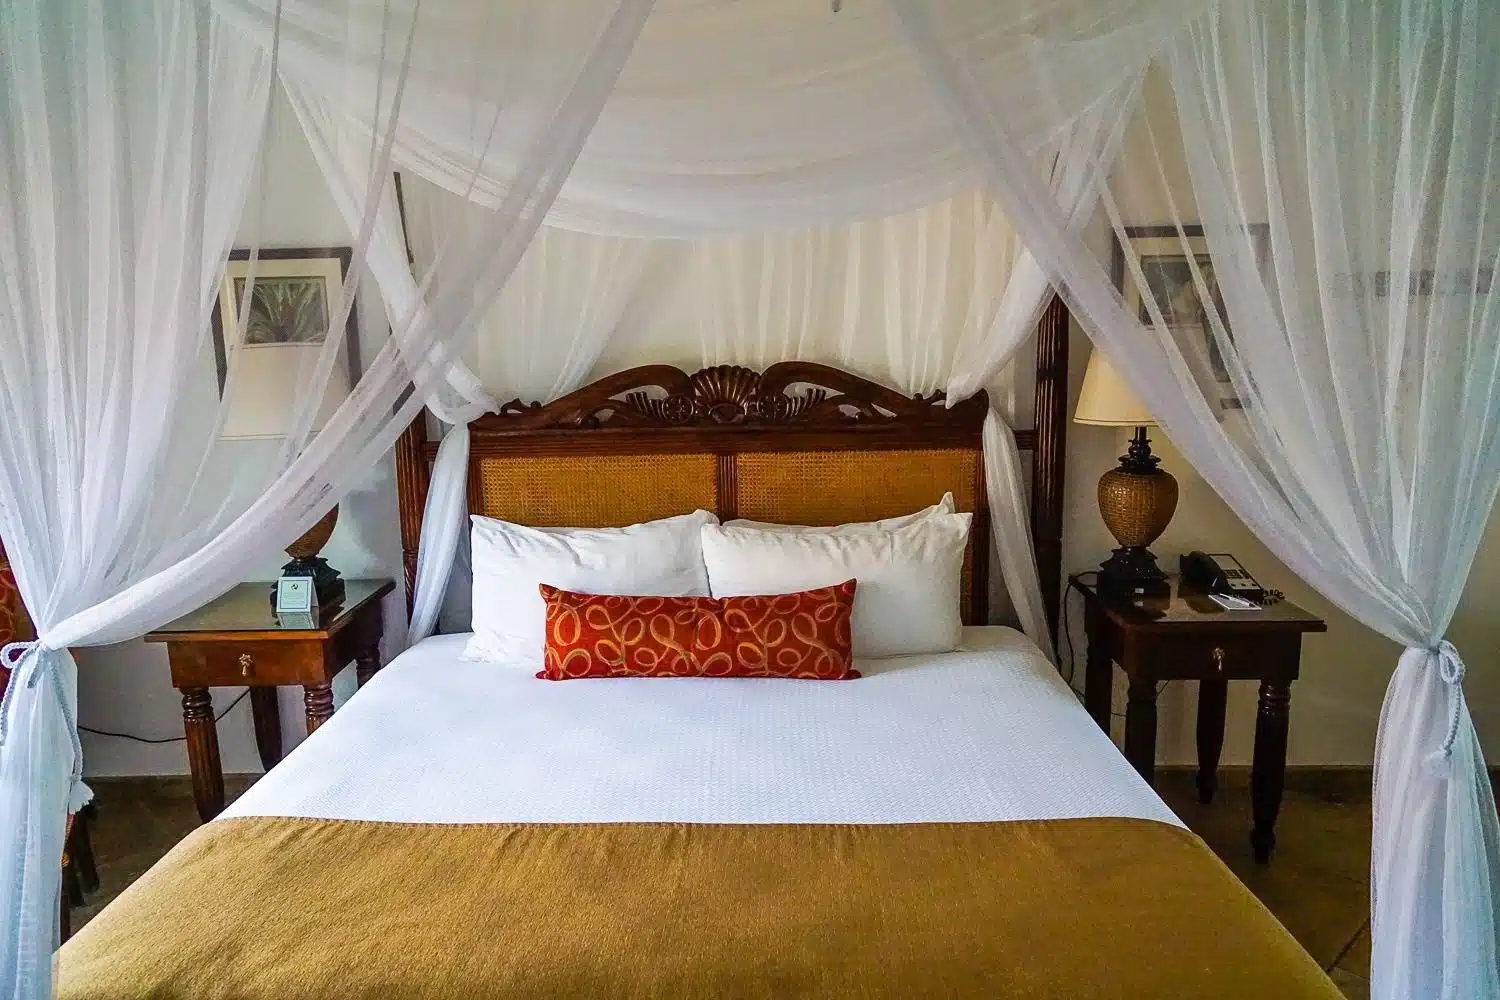 There wasn't a single mosquito in my room, but I appreciated the canopy drape on the bed!